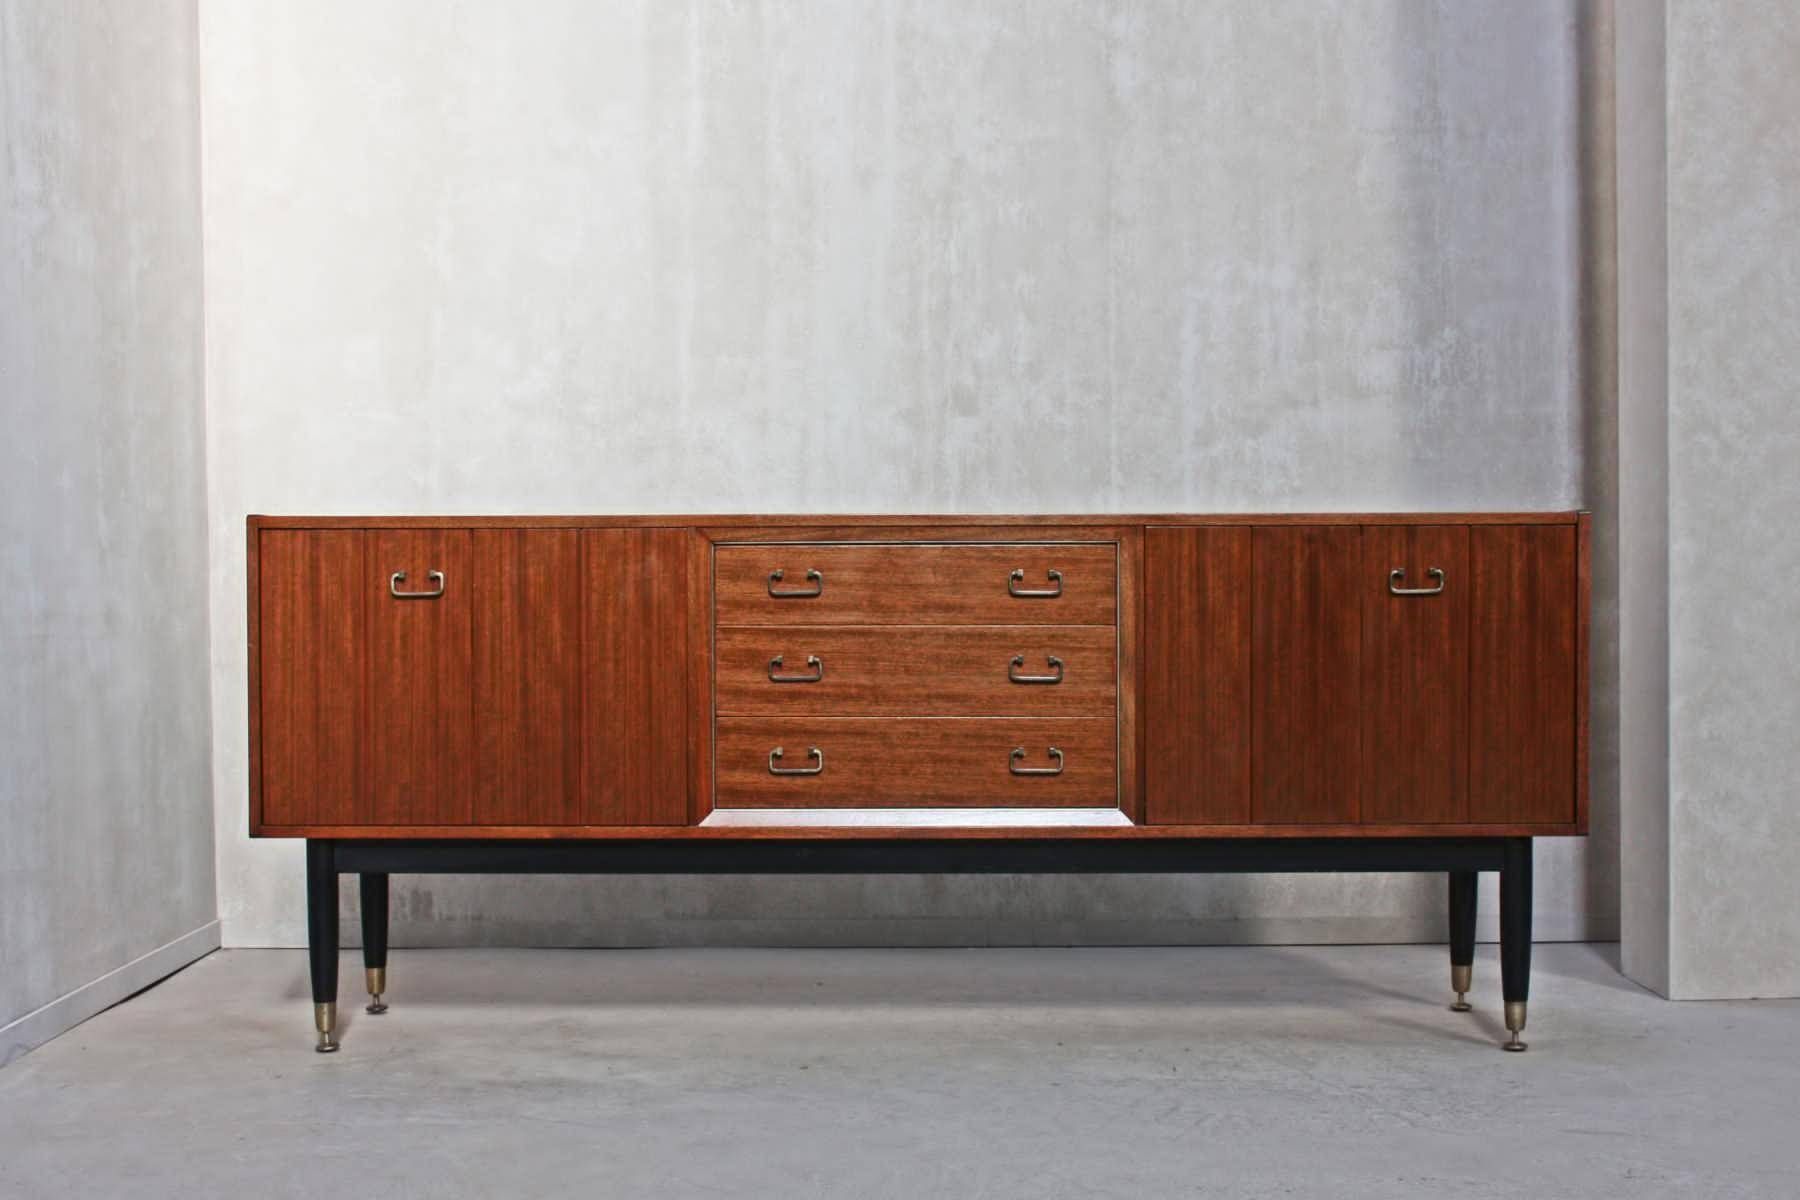 Vintage Sideboard From G Plan, 1950s For Sale At Pamono For G Plan Vintage Sideboards (View 7 of 15)